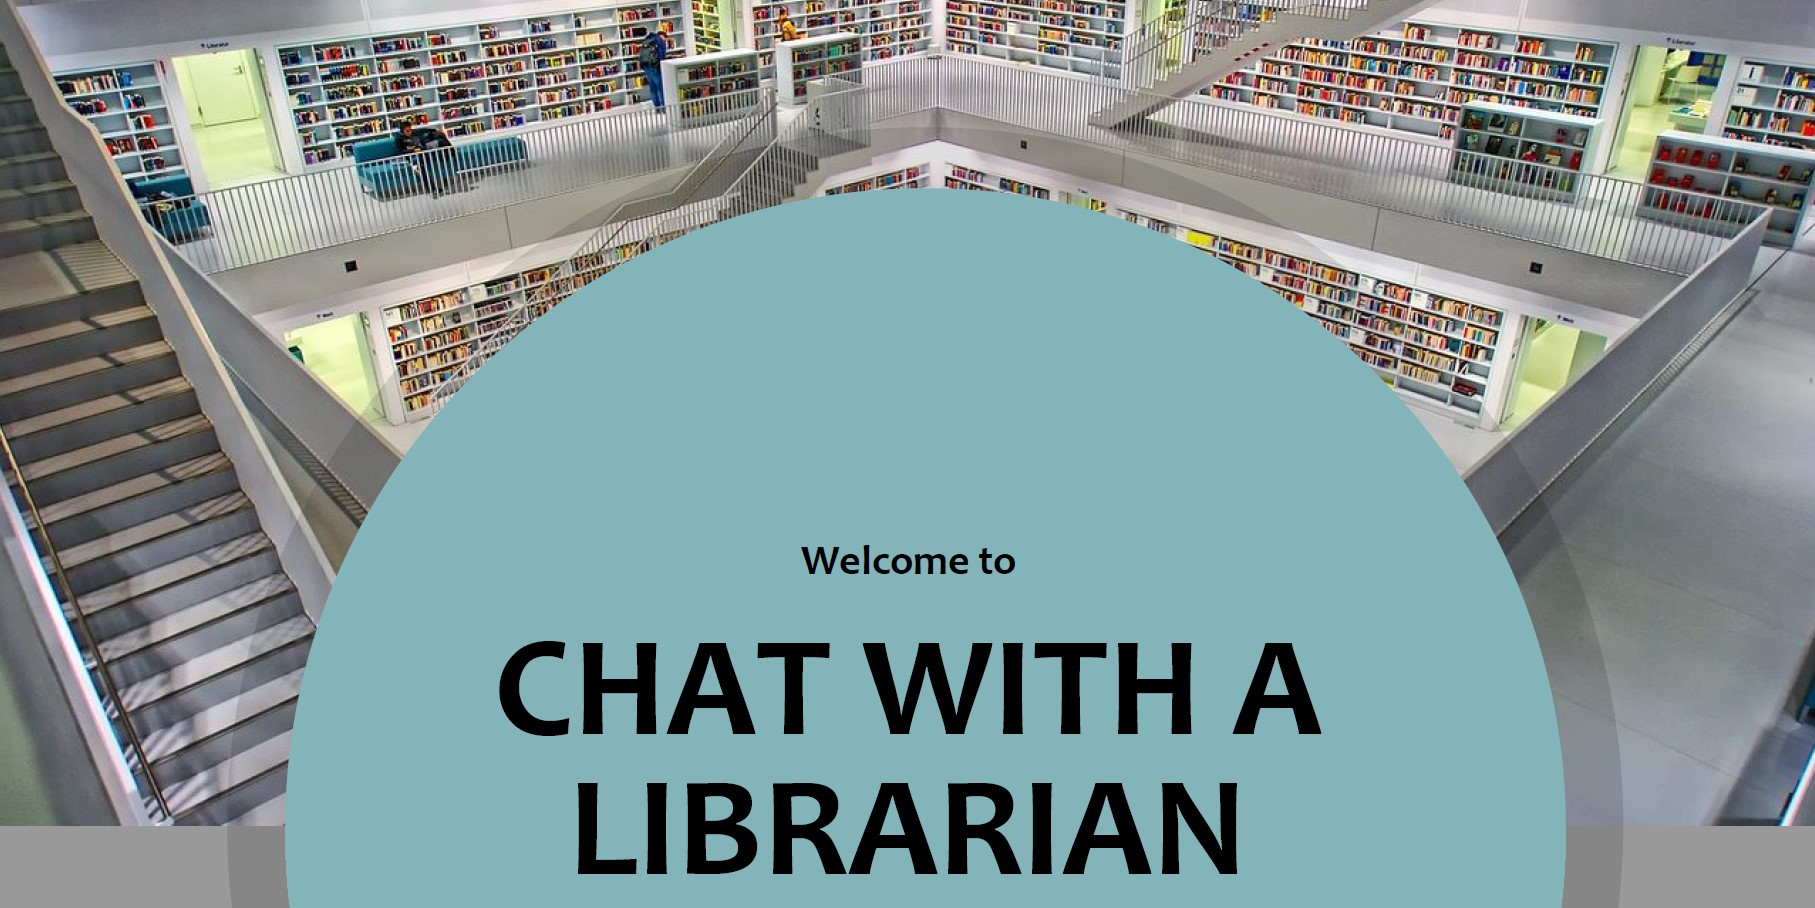 Welcome screen for Chat With A Librarian service